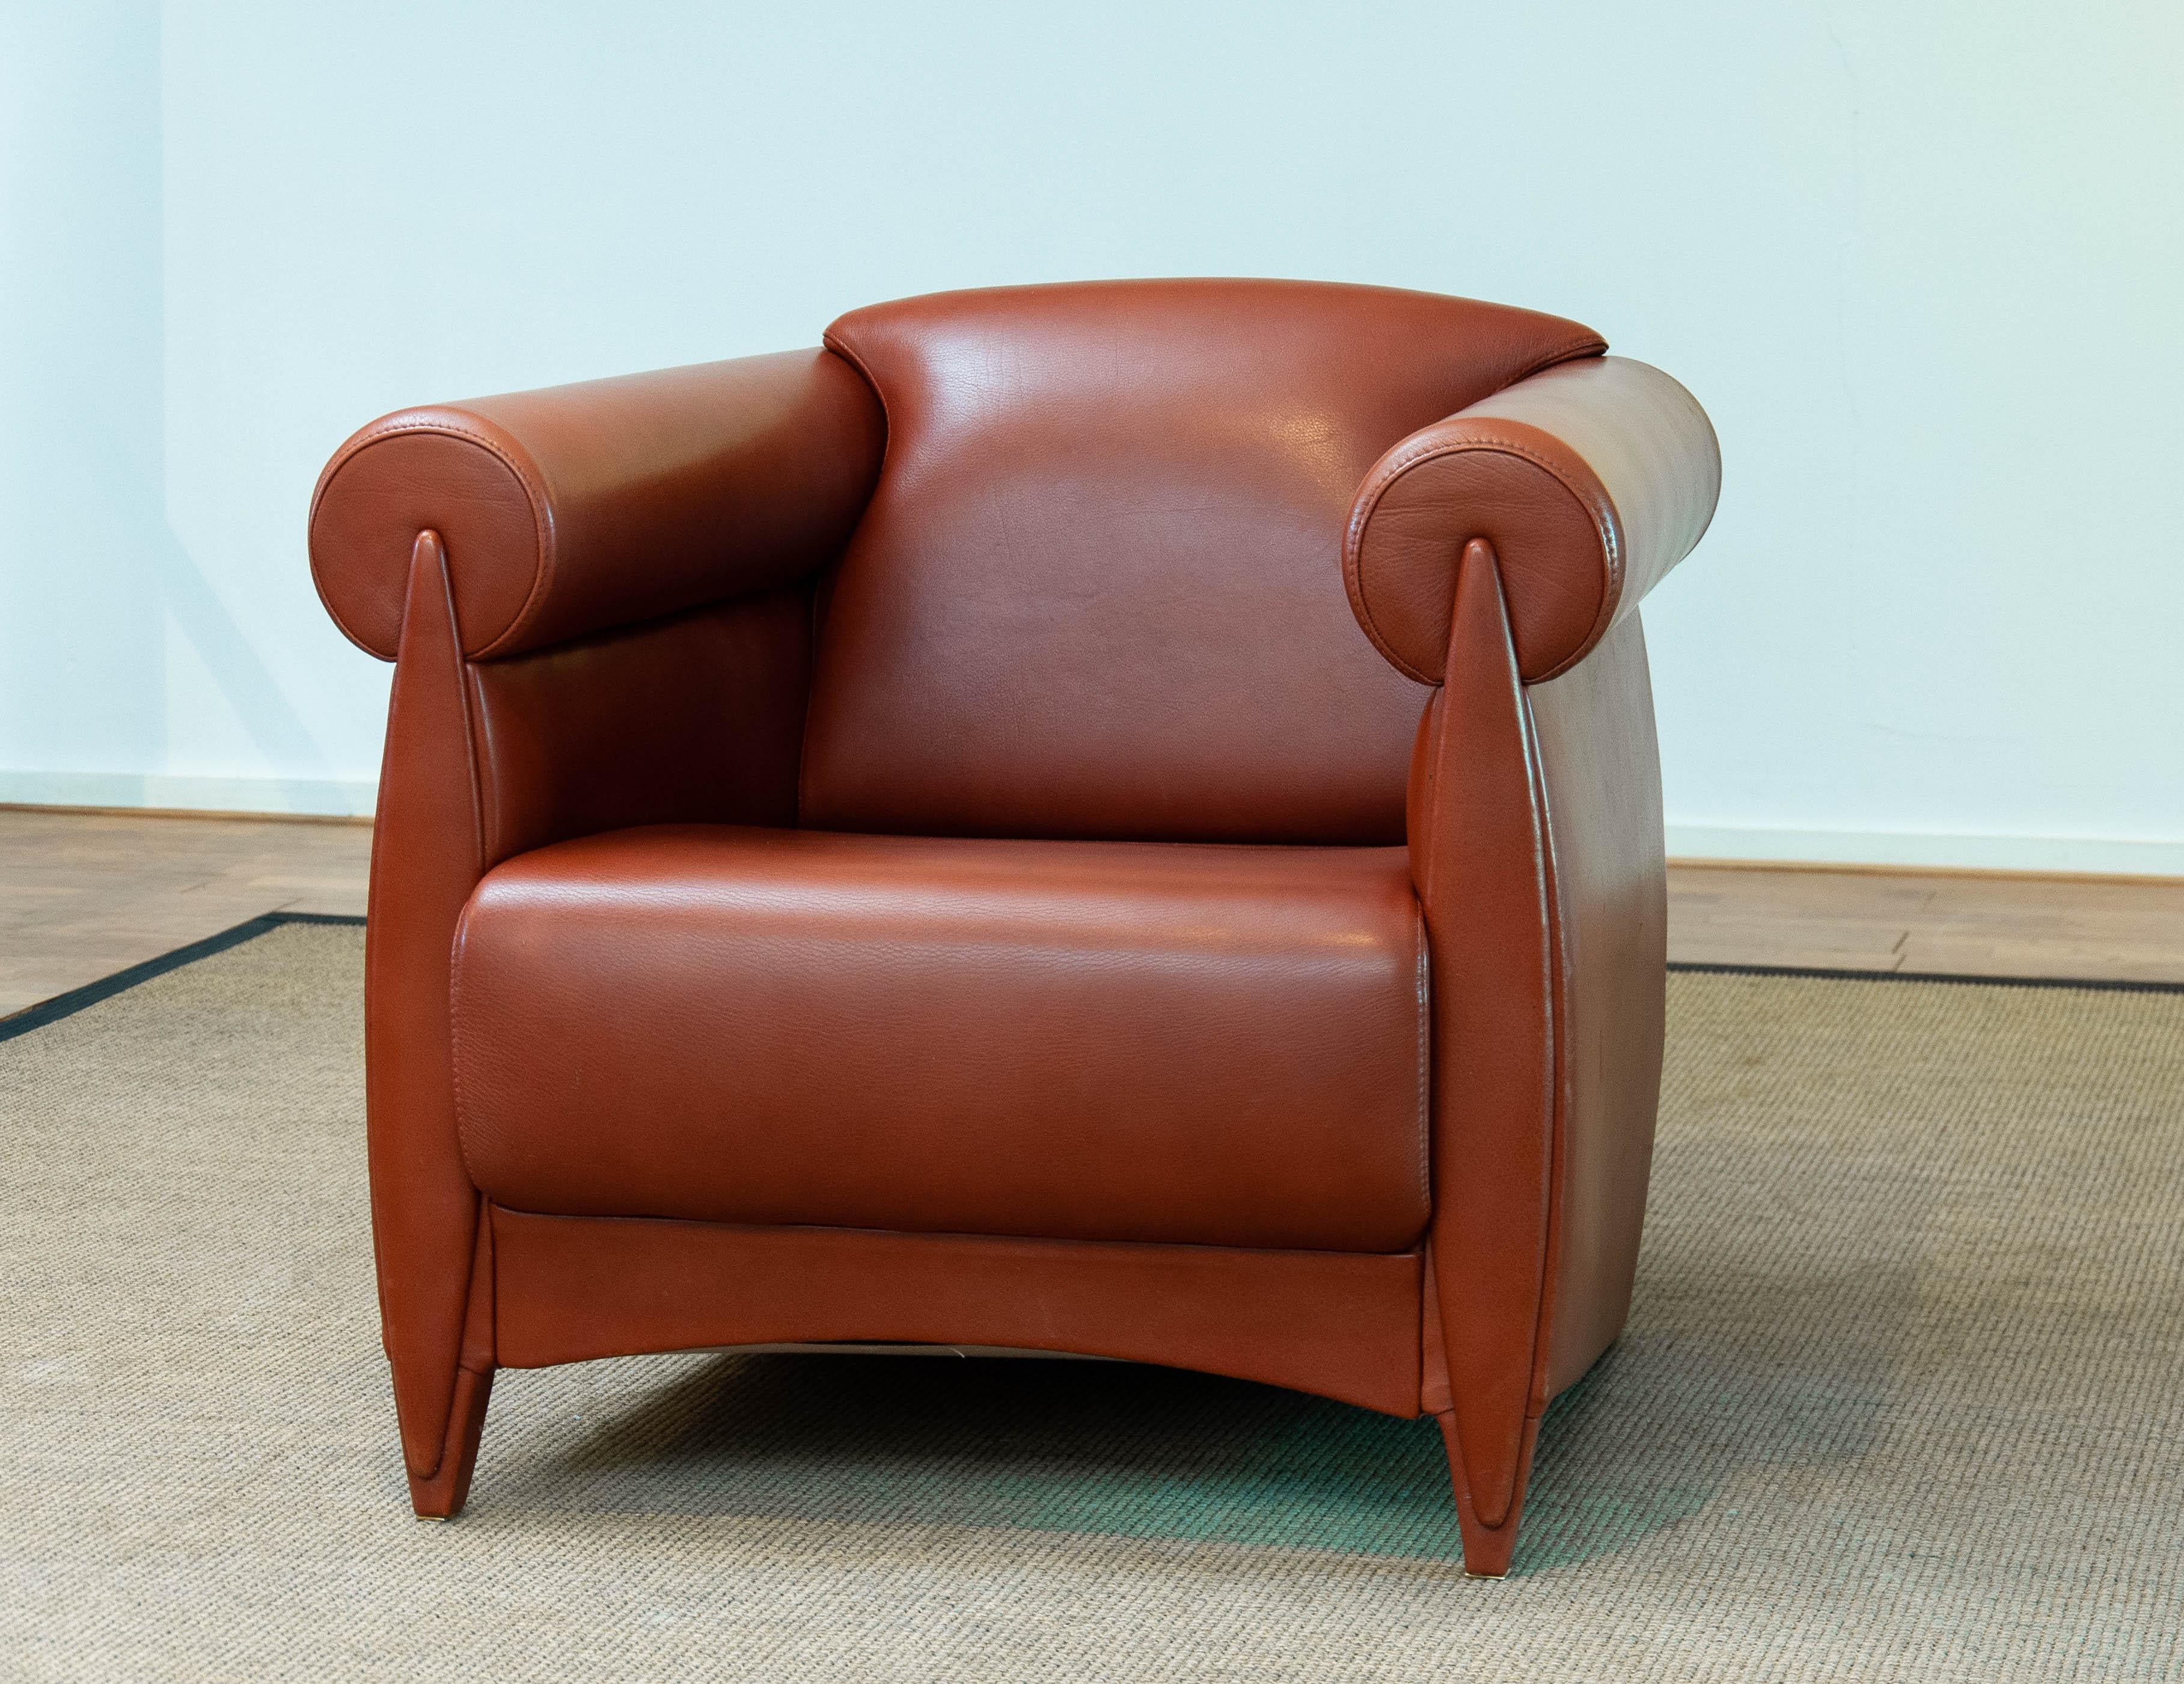 1980s Modern Lounge / Club Chair in Cognac Leather by Klaus Wettergren Denmark For Sale 3